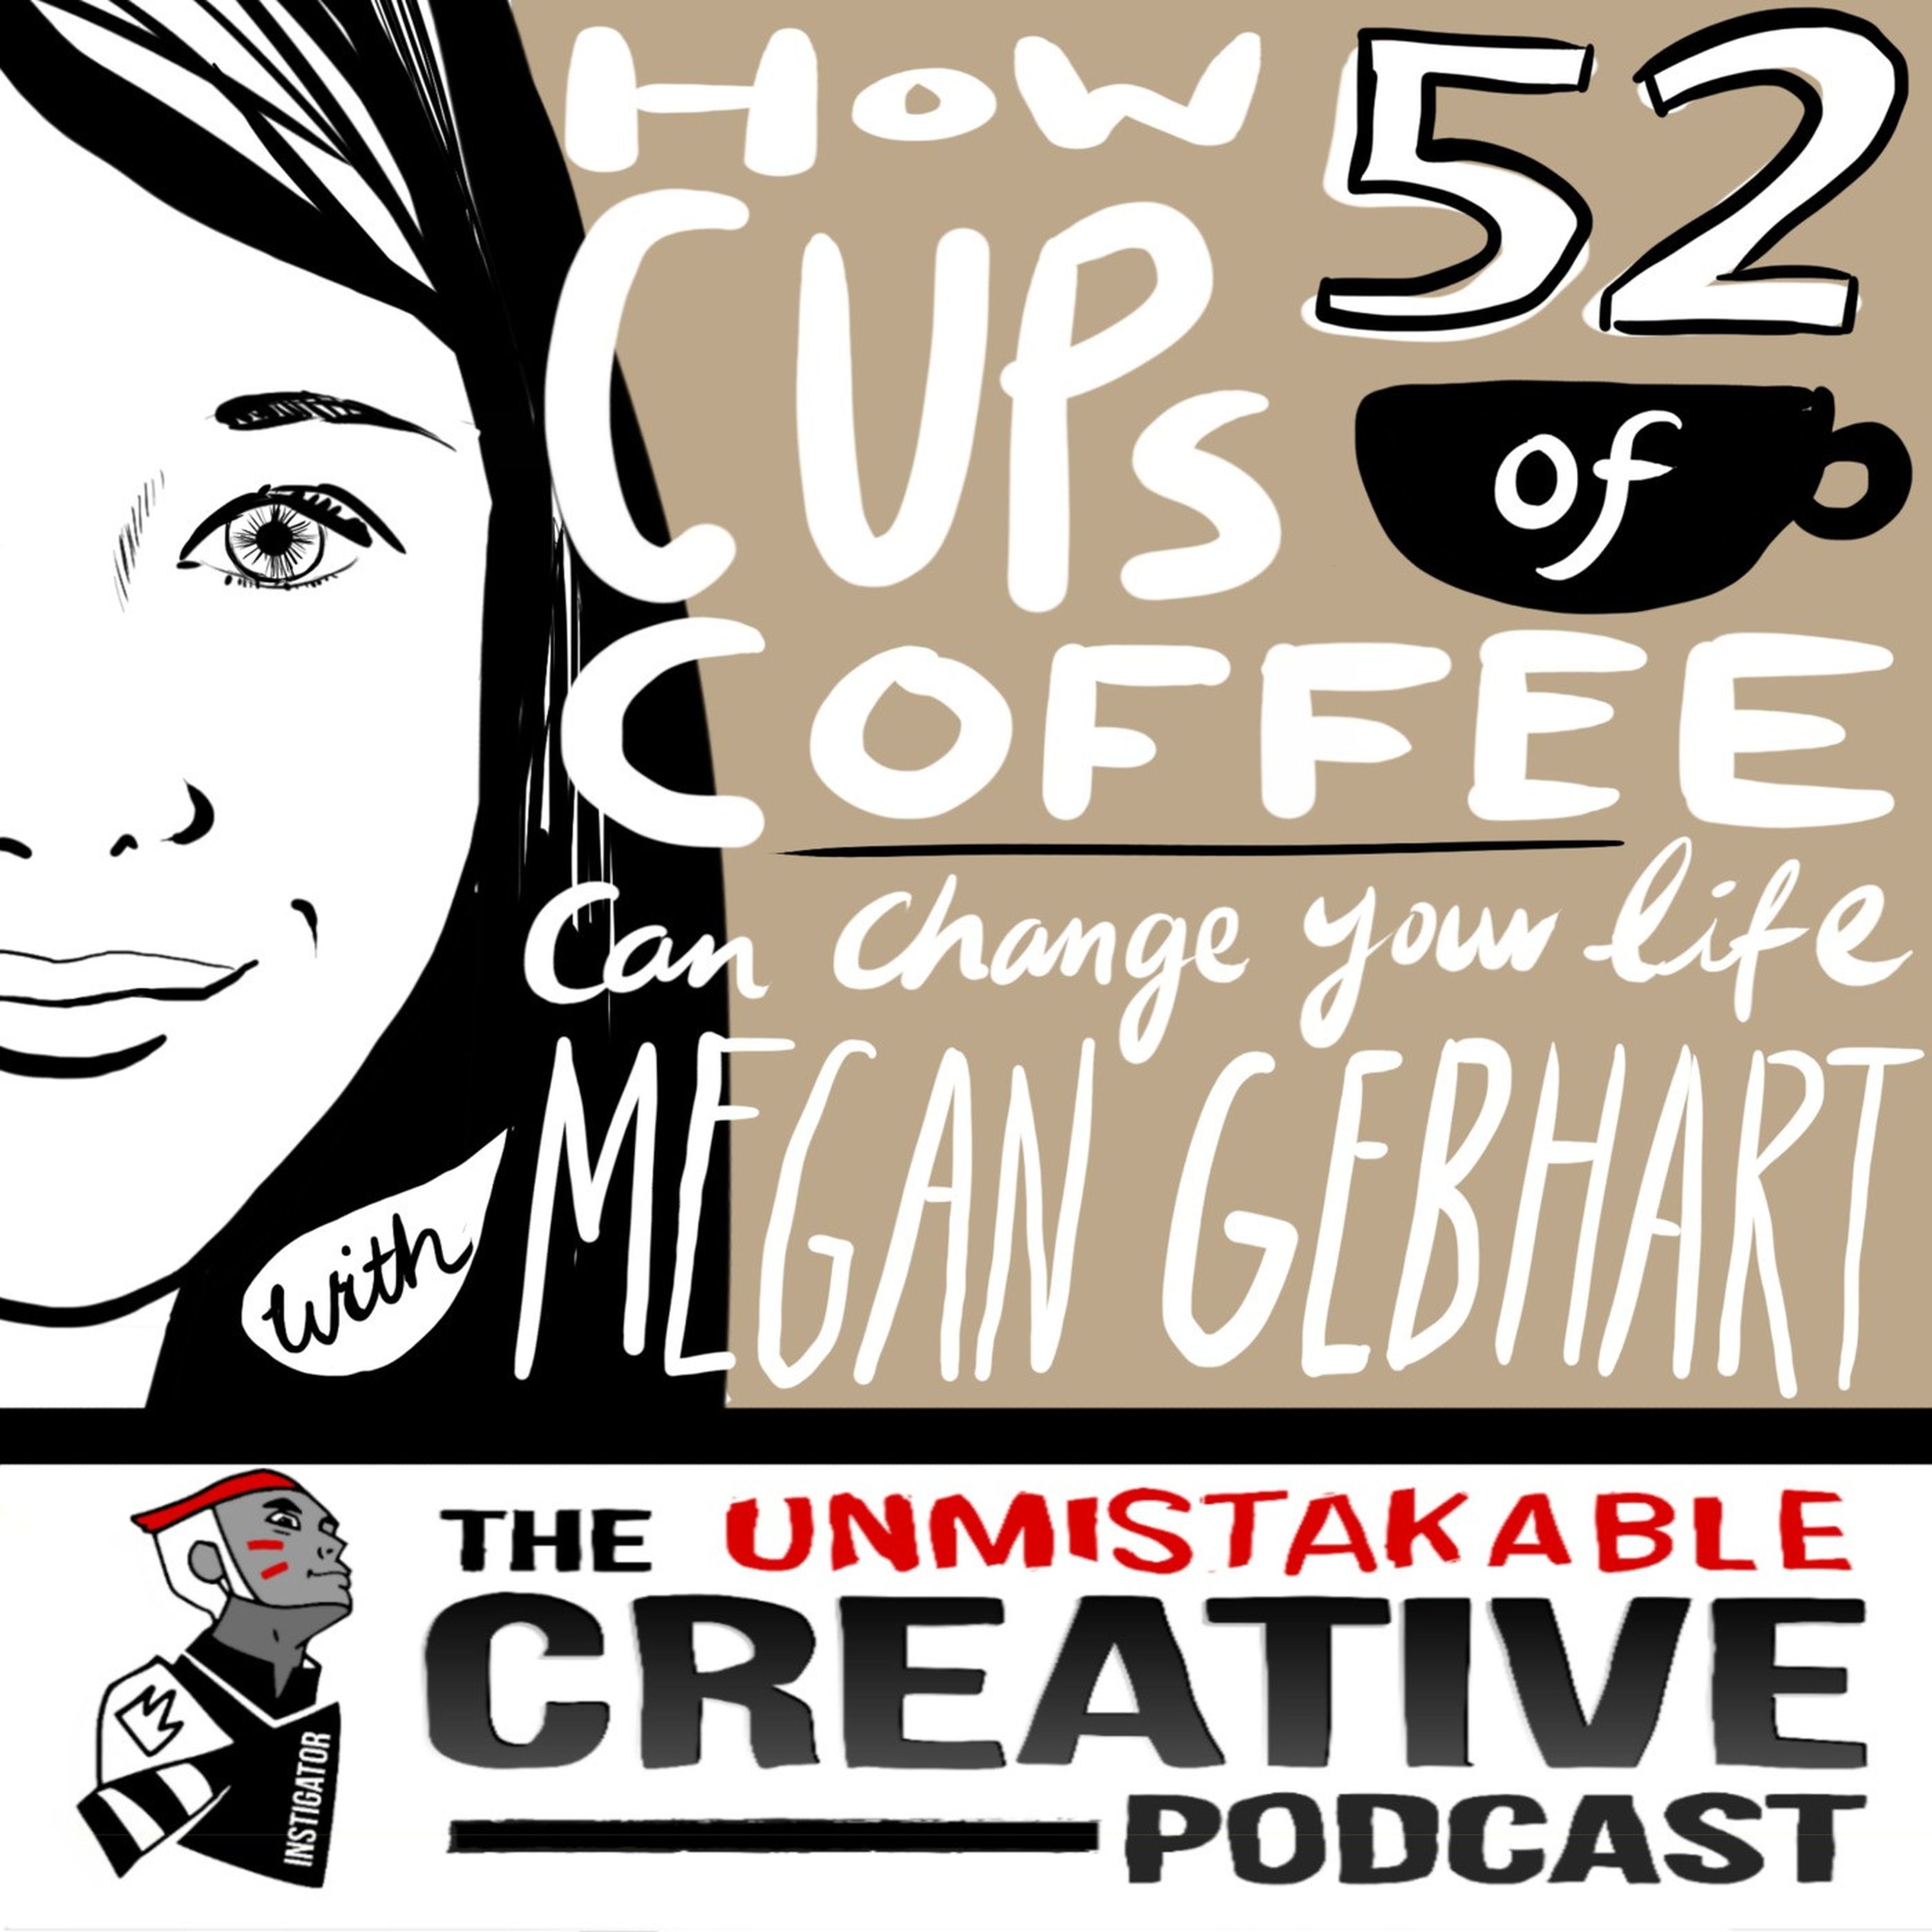 How 52 Cups of Coffee Can Change Your Life with Megan Gebhart Image